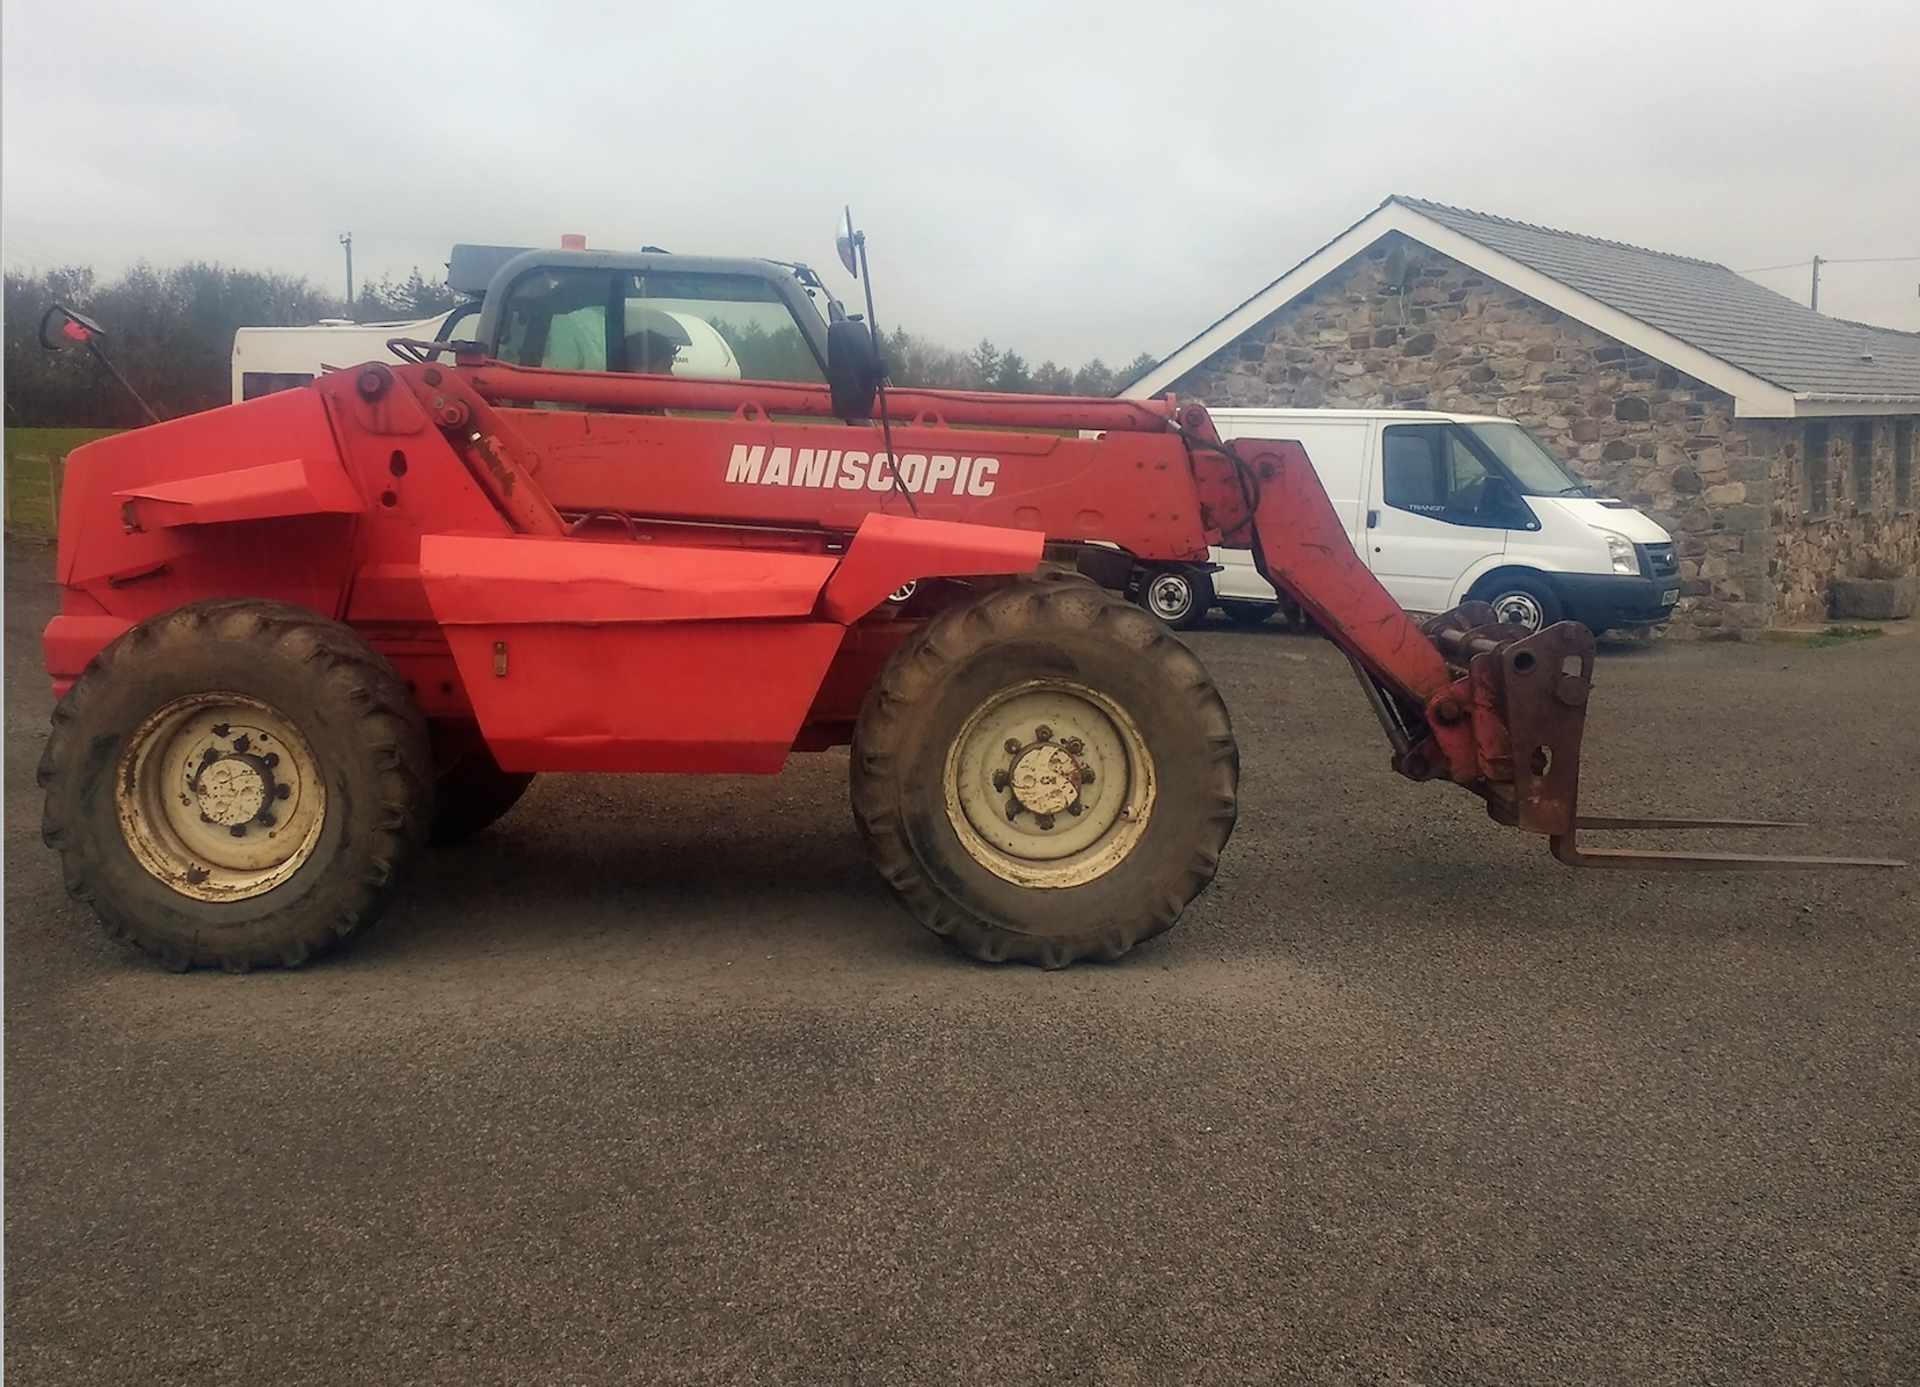 1998 9m Manitou Maniscopic, 14000Hrs - Image 2 of 5